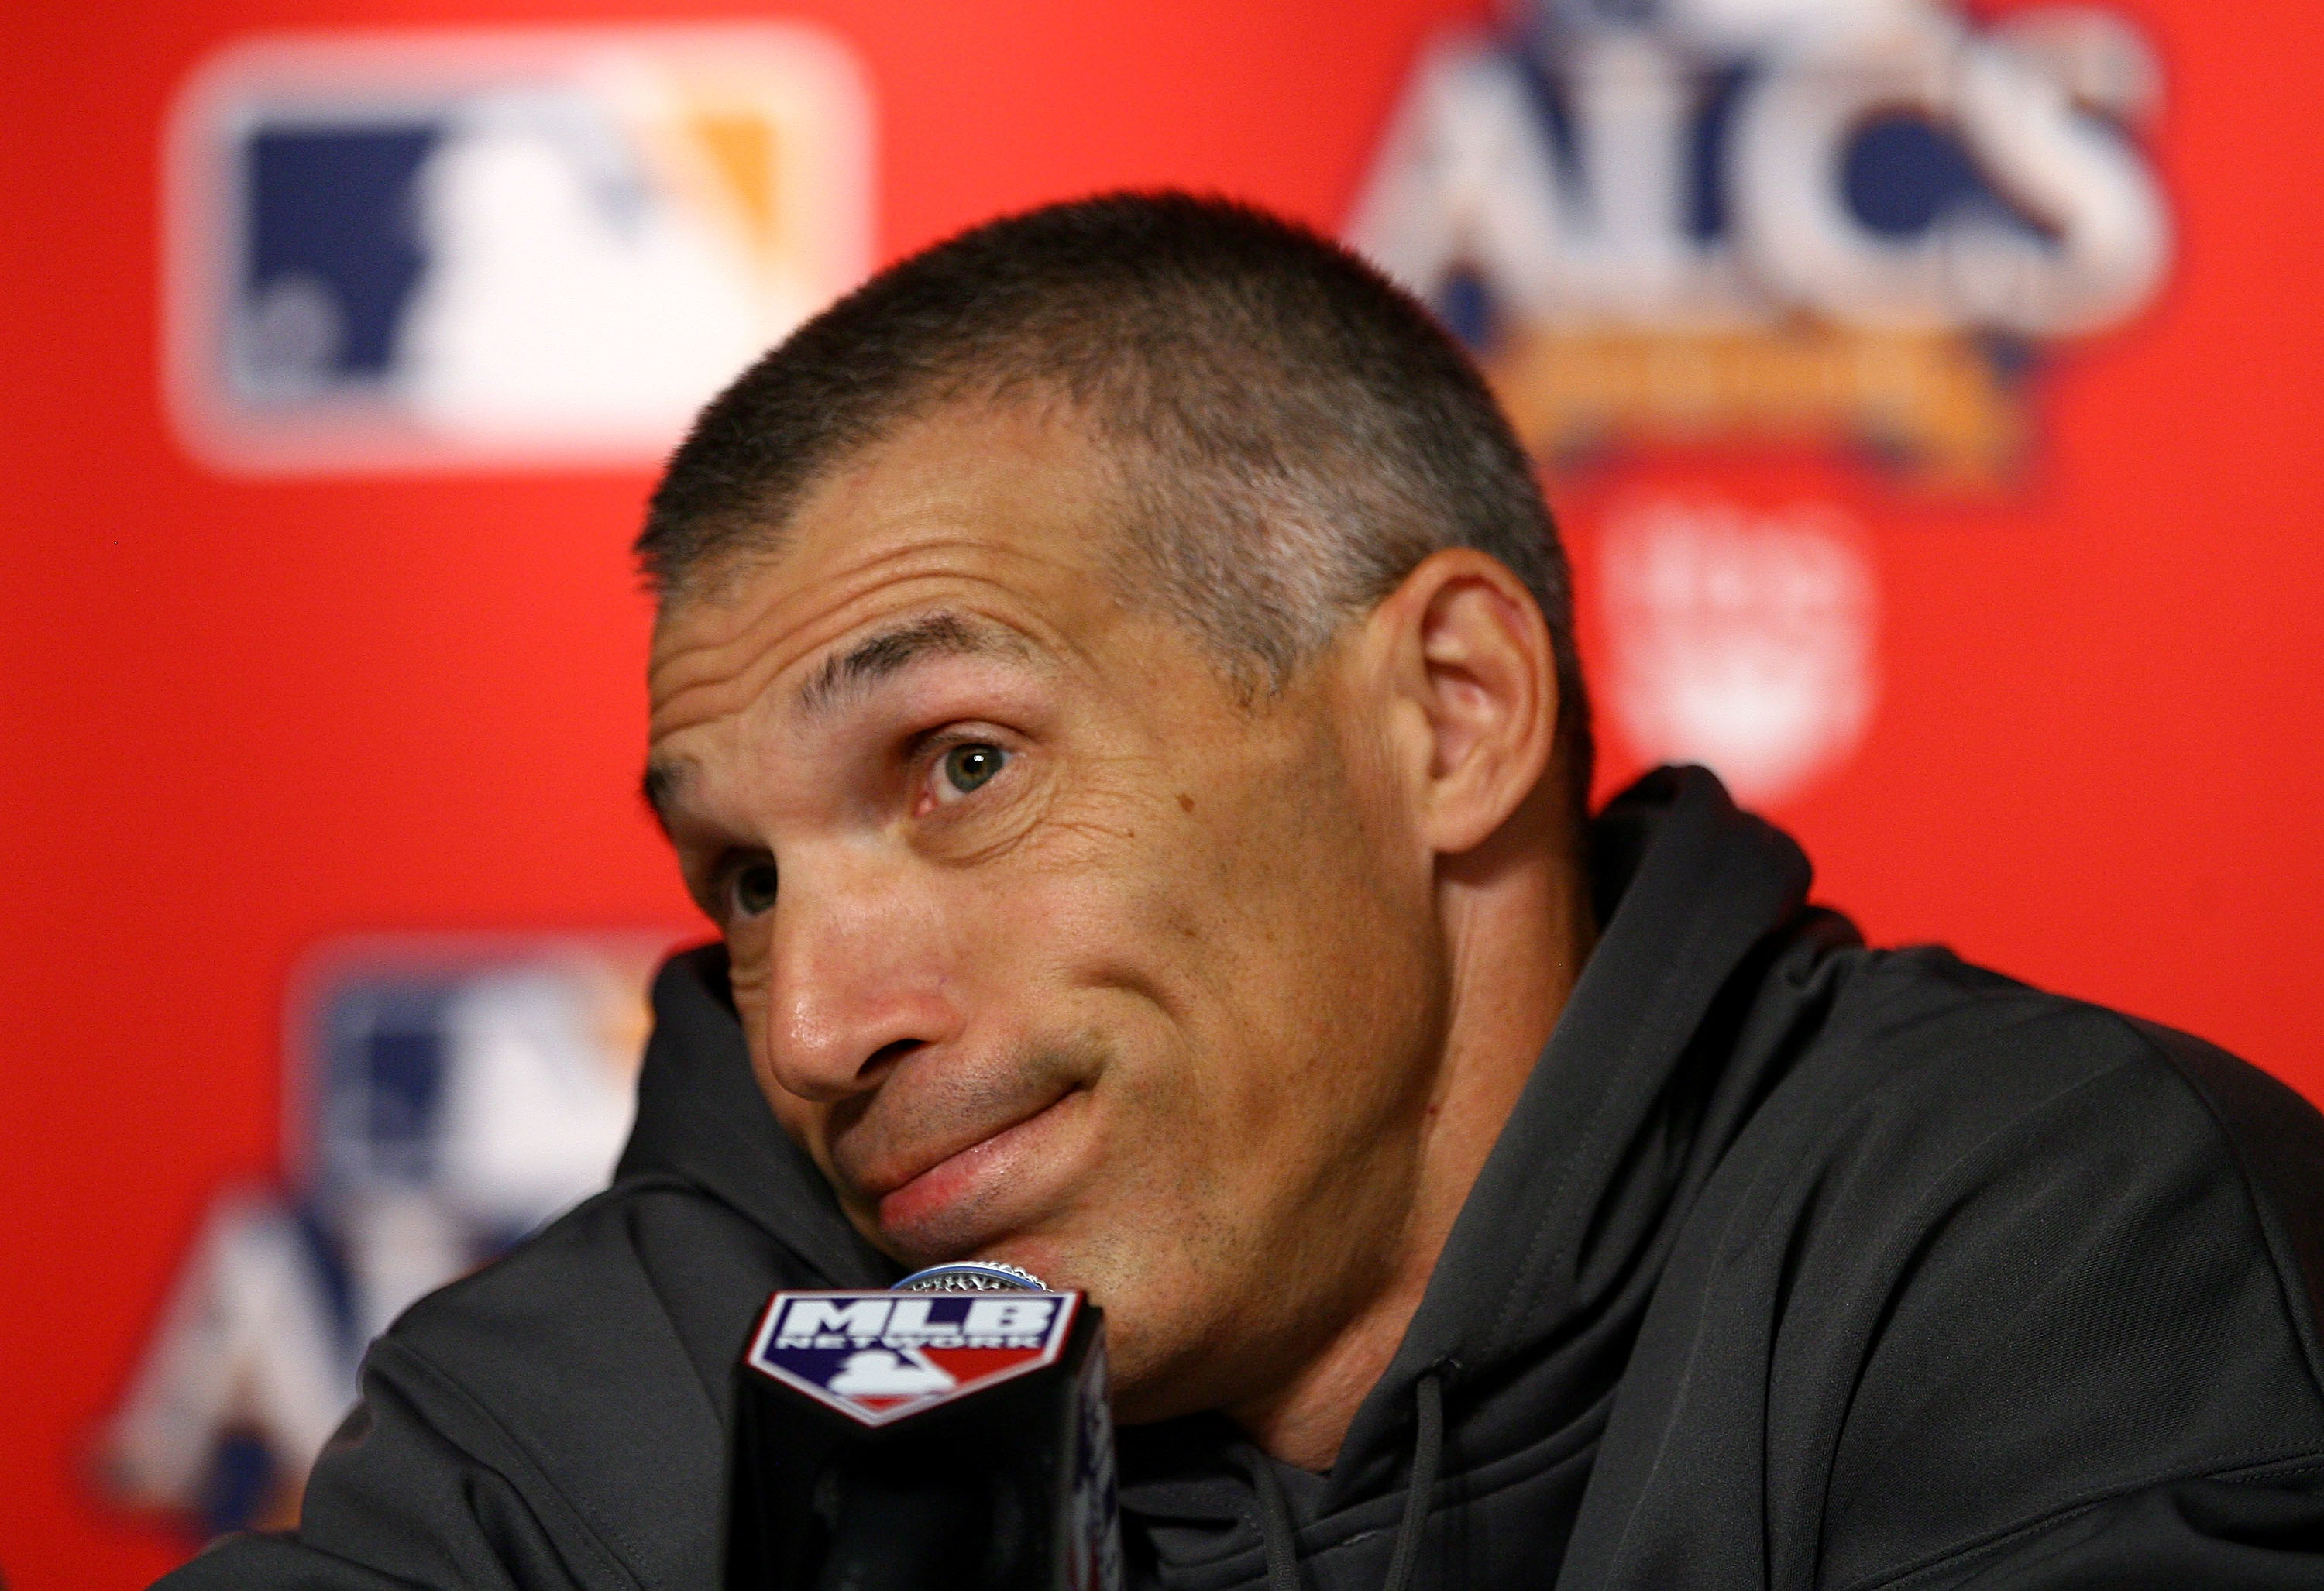 NEW YORK - OCTOBER 18:  Manager Joe Girardi of the New York Yankees speaks during his pregame press conference against the Texas Rangers prior to Game Three of the ALCS during the 2010 MLB Playoffs at Yankee Stadium on October 18, 2010 in New York, New Yo